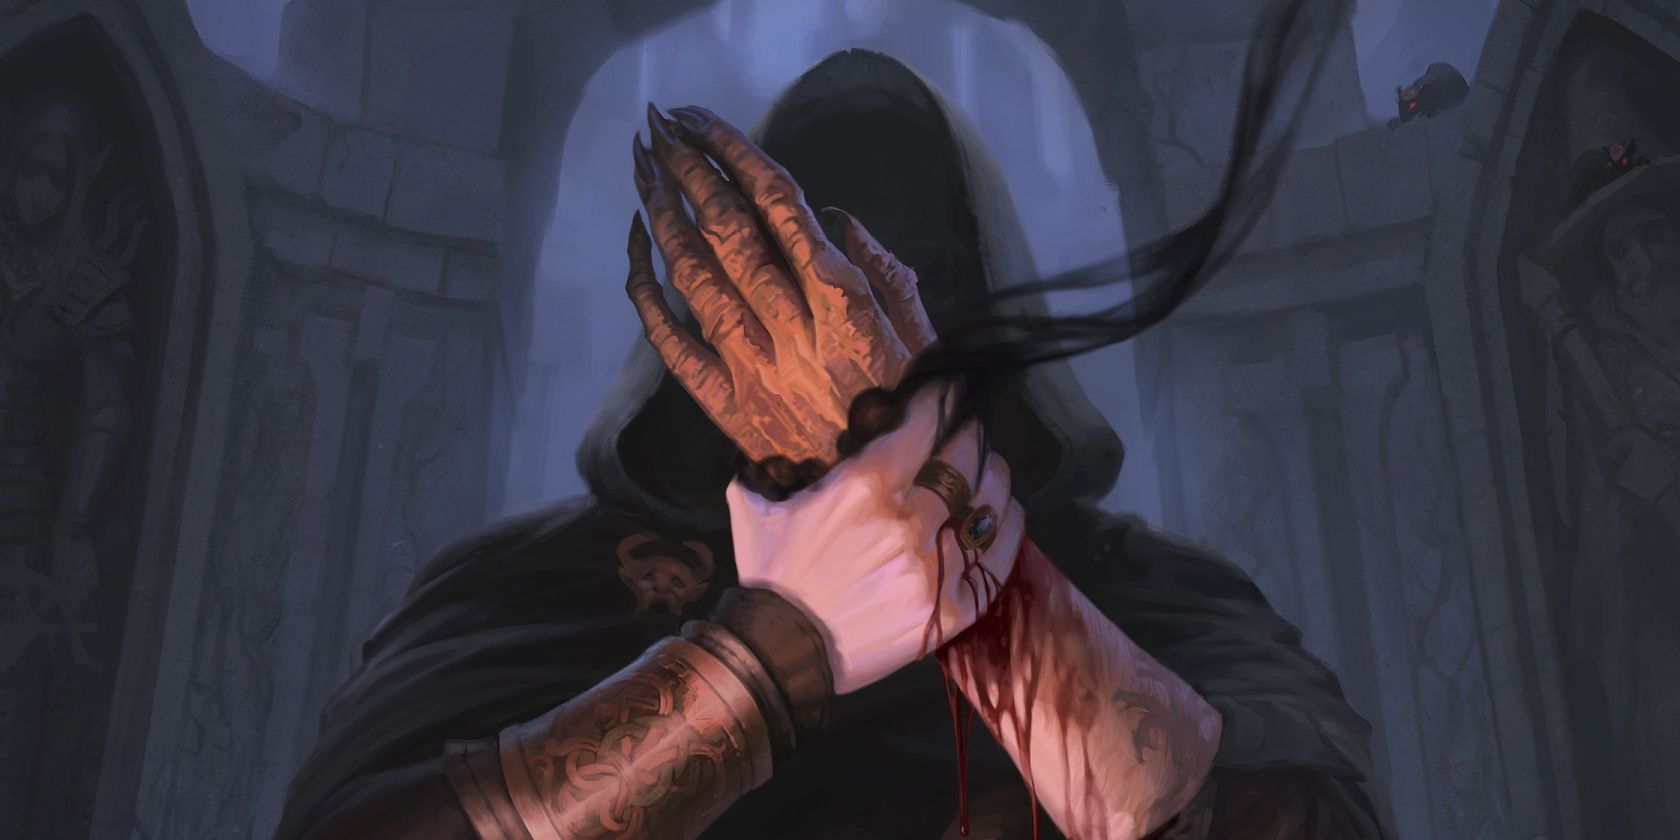 hooded figure holding their bloody wrist as they attach a decrepit looking hand to it